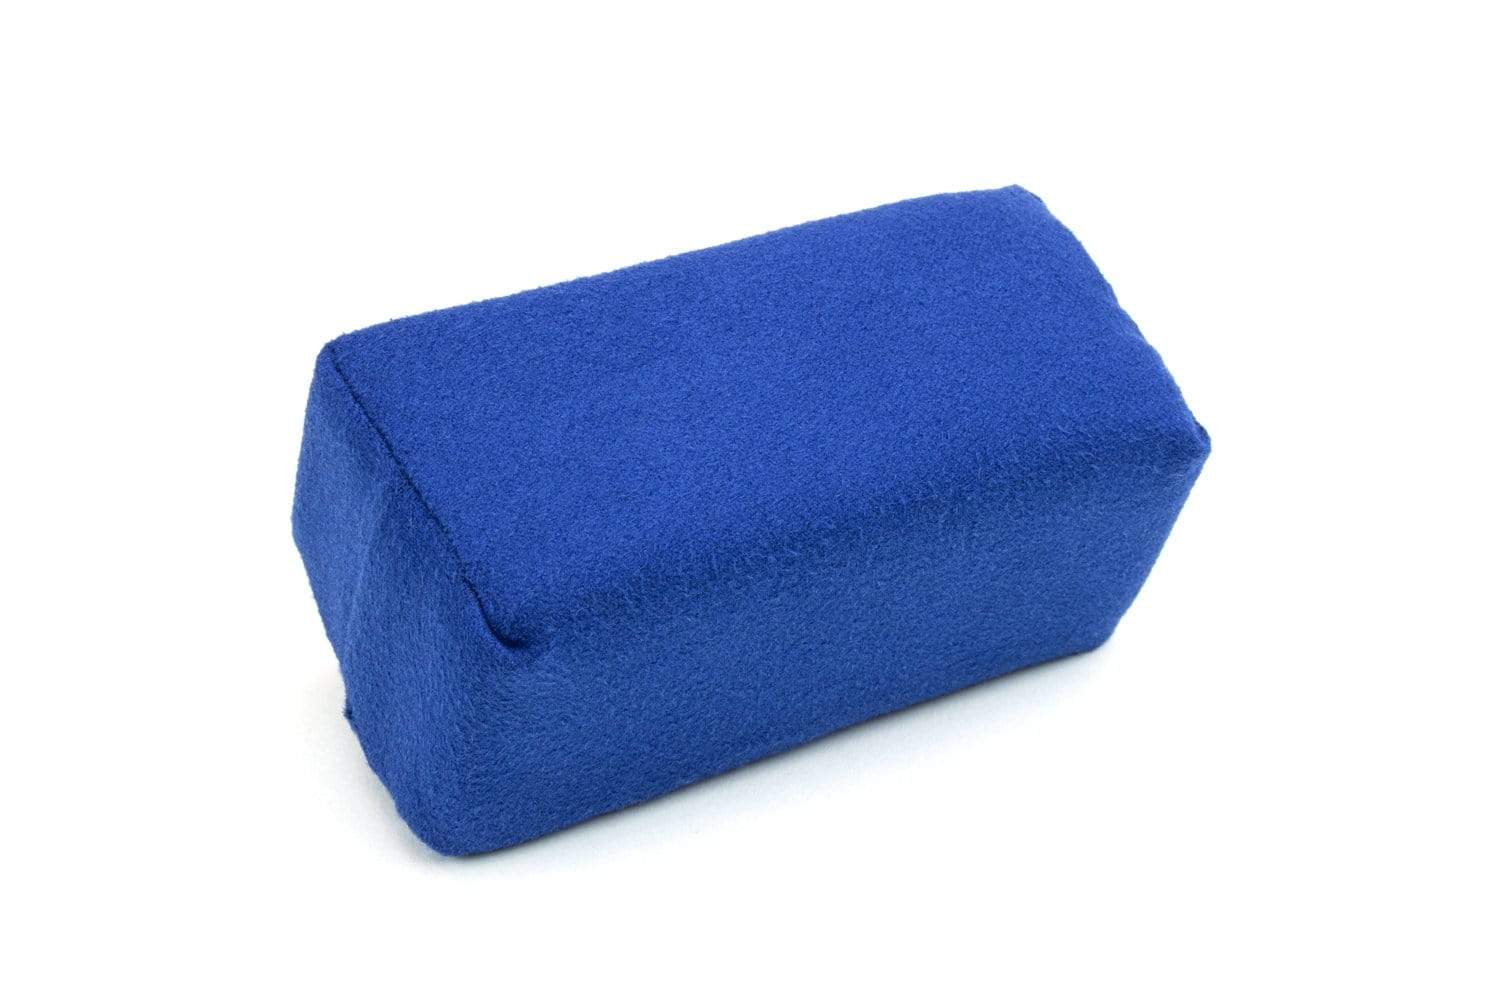 Autofiber [Saver Applicator Terry] Ceramic Coating Applicator Sponge | 12  Pack | with Plastic Barrier to Reduce Product Waste. (Blue/Gray, Mini)